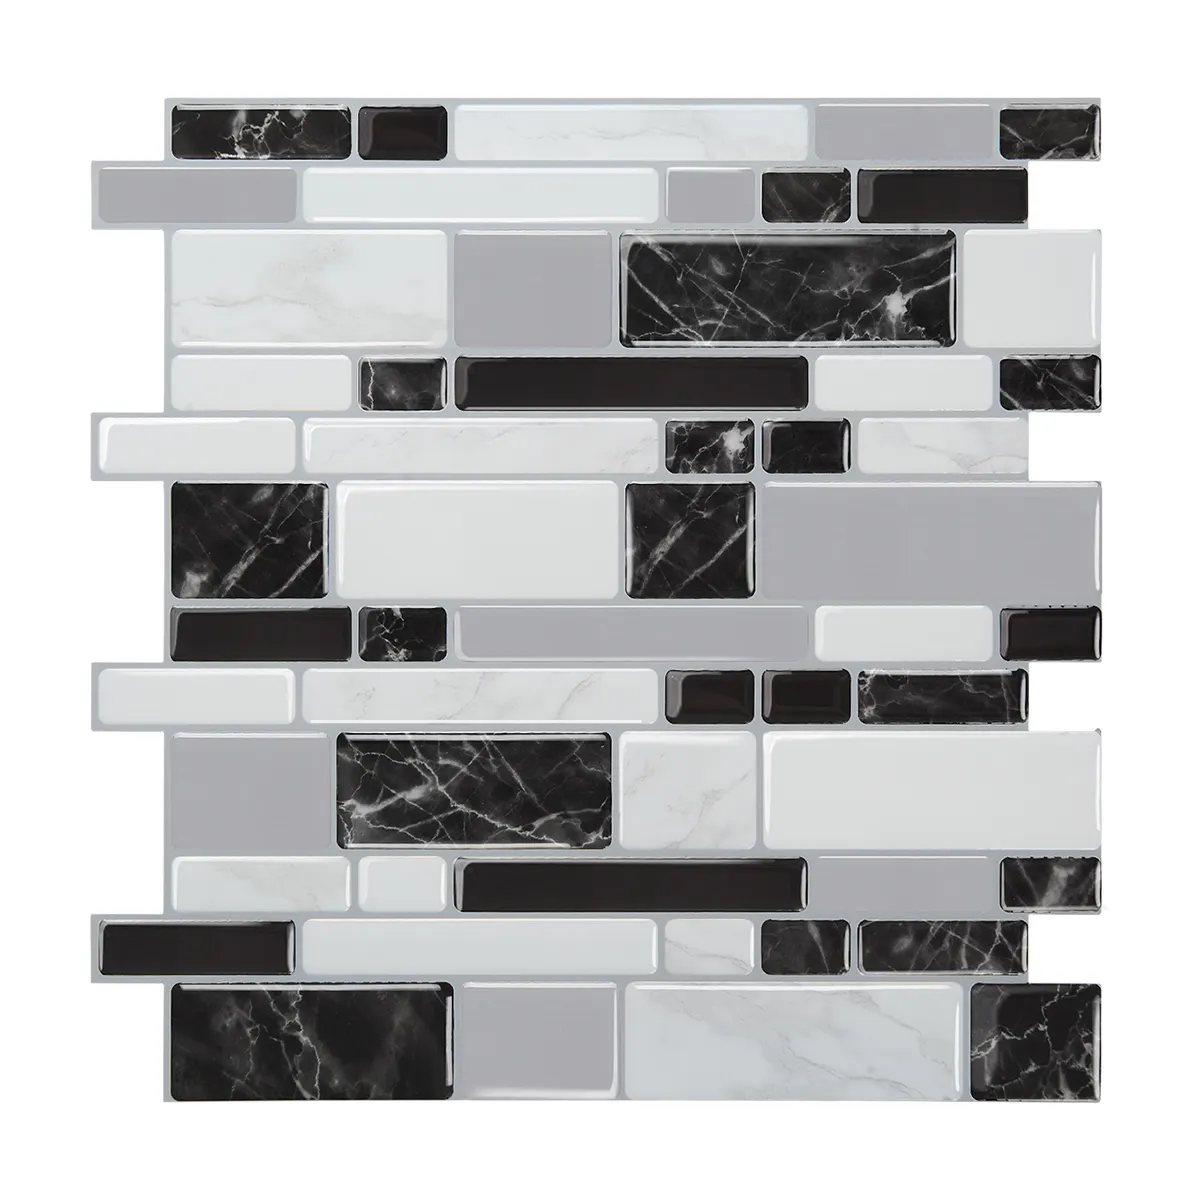 Sticky marble Wall Tile 2.5mm Thickness 12*12 Inch Peel and Stick Kitchen Backsplash Bathroom Waterproof